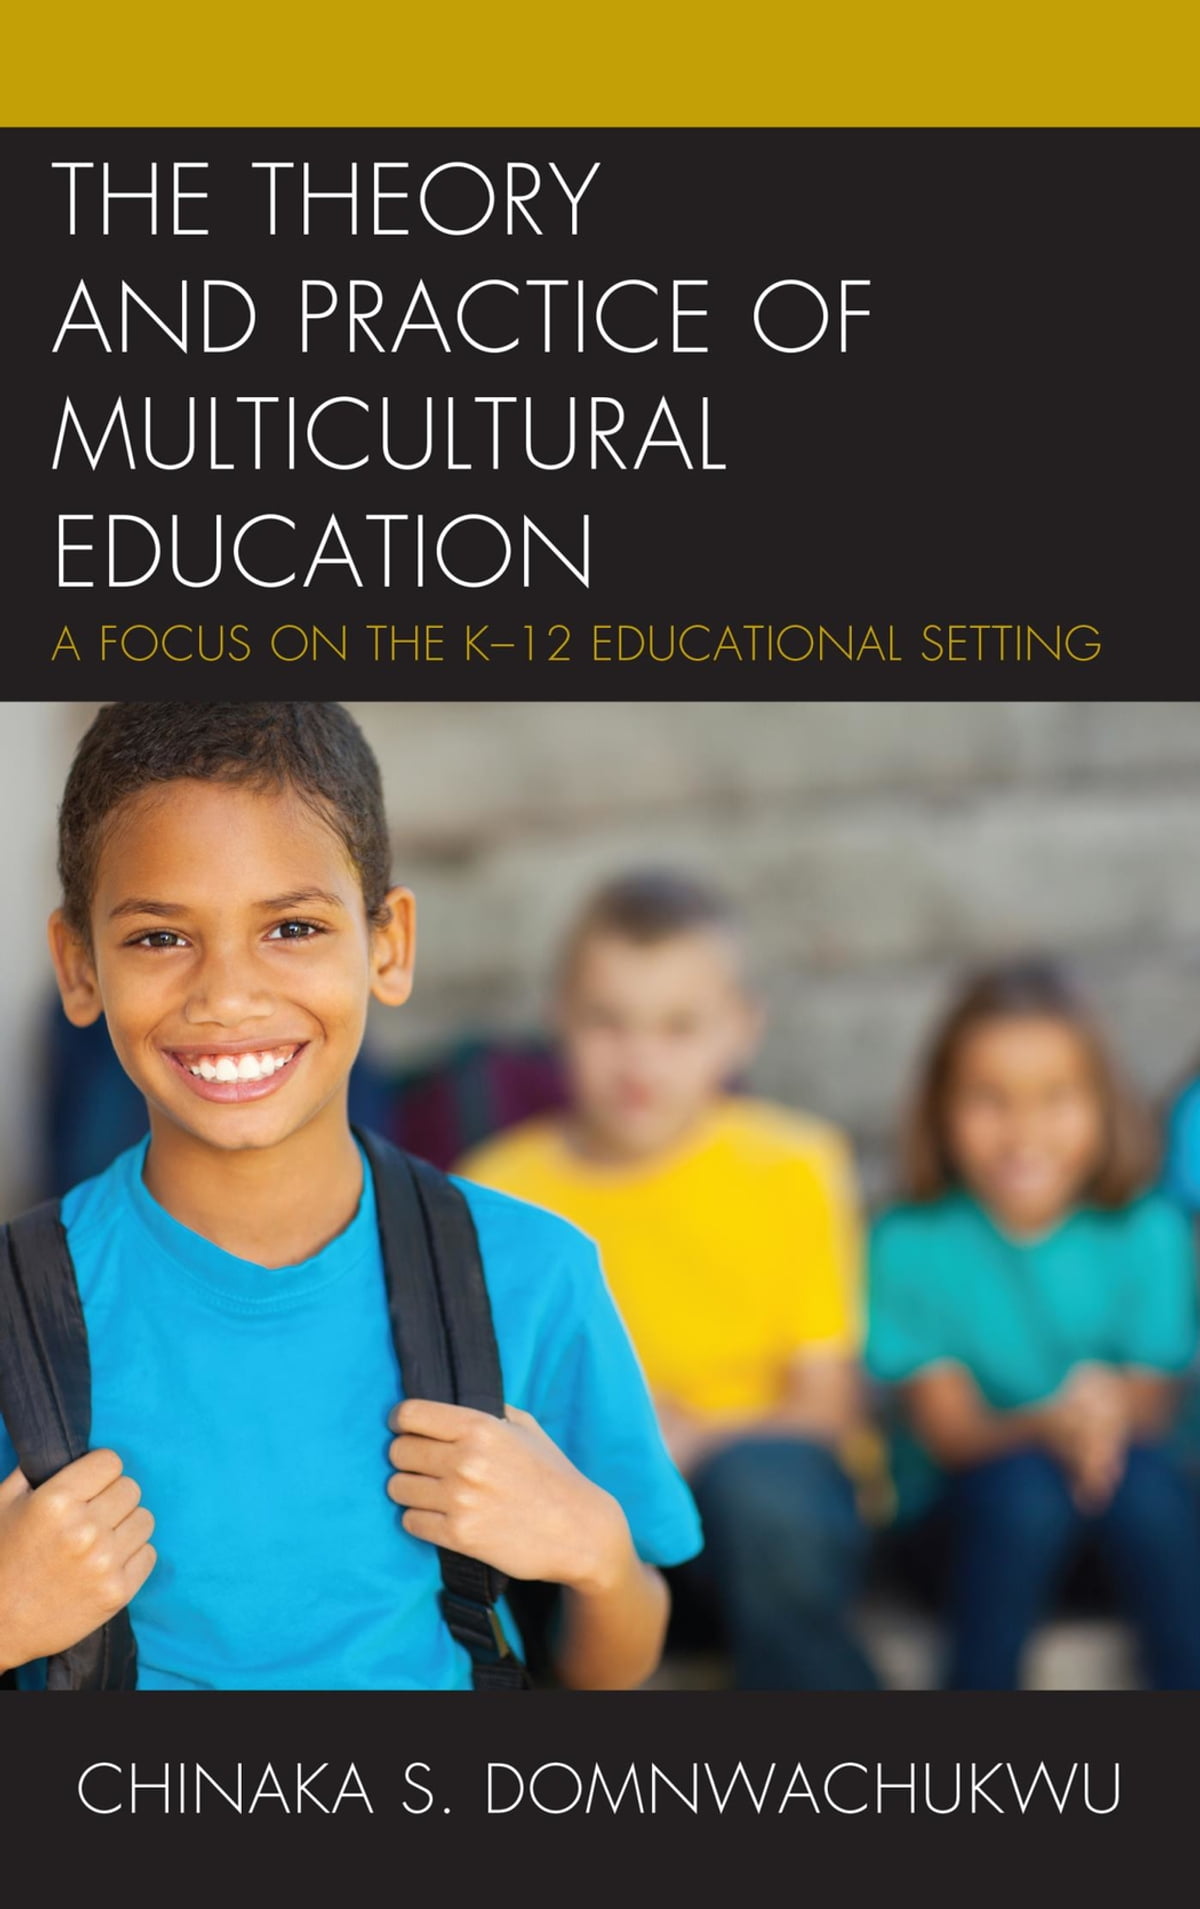 What Is Multicultural Education and How Can You Implement It in Your Classroom?